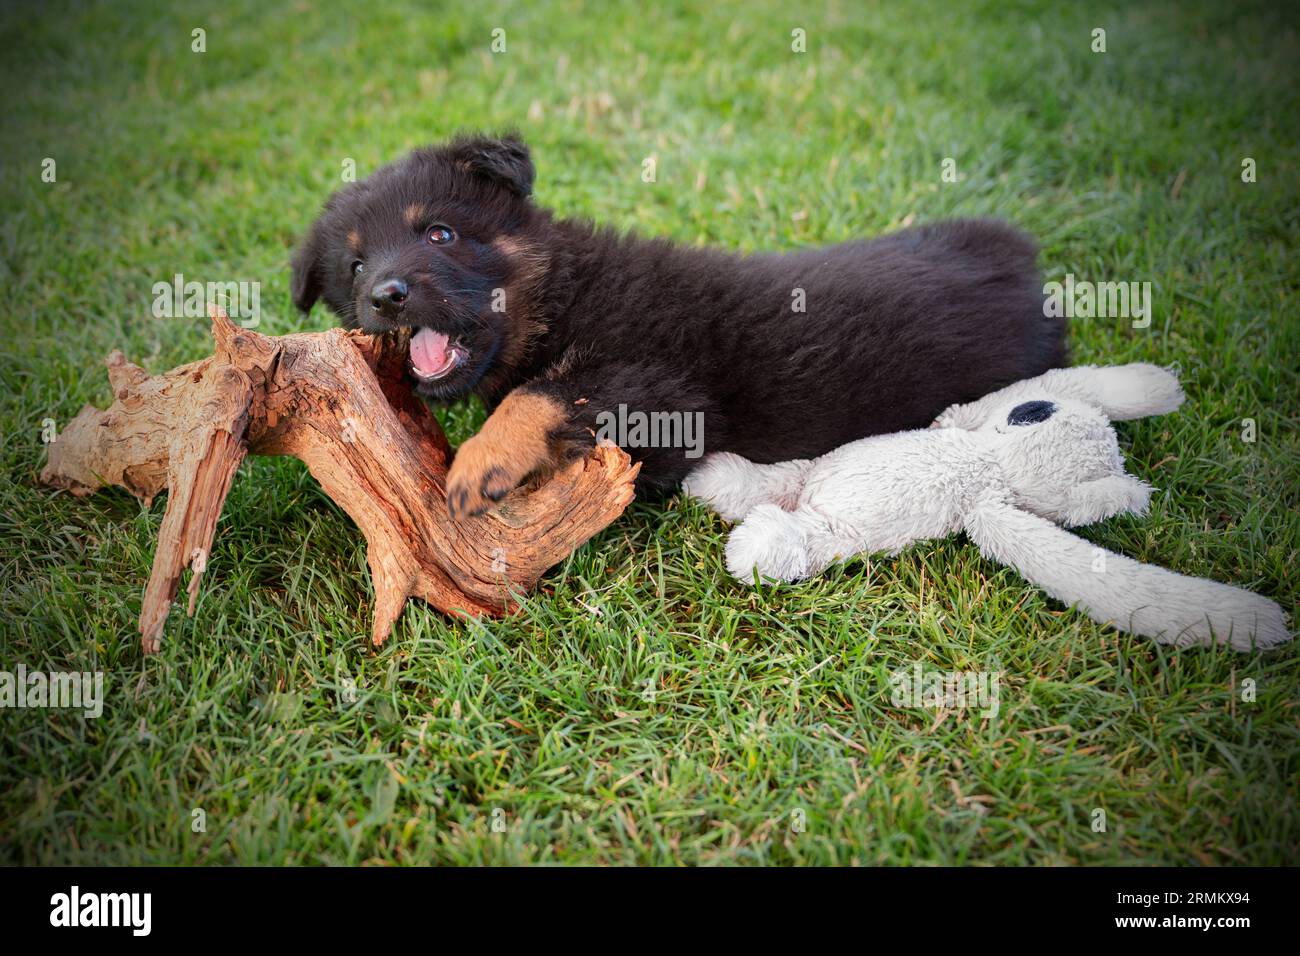 Adorable 2 month puppy of Bohemian (chodsky) dog lies down on grass on garden and bites piece of wood, next to it lies plush toy. Stock Photo